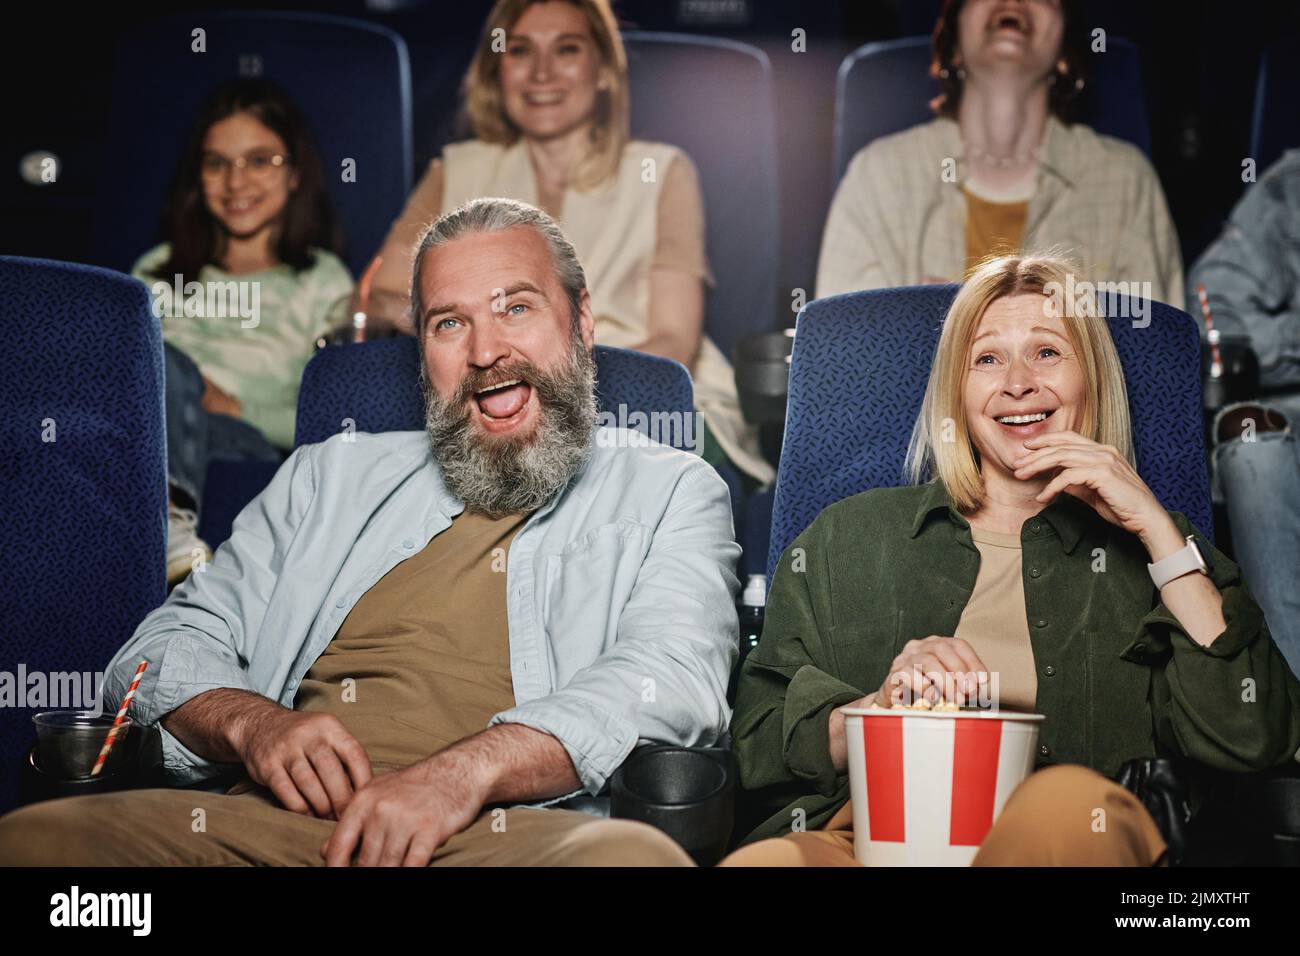 Group of people spending weekend at cinema watching funny comedy movie, selective focus shot Stock Photo